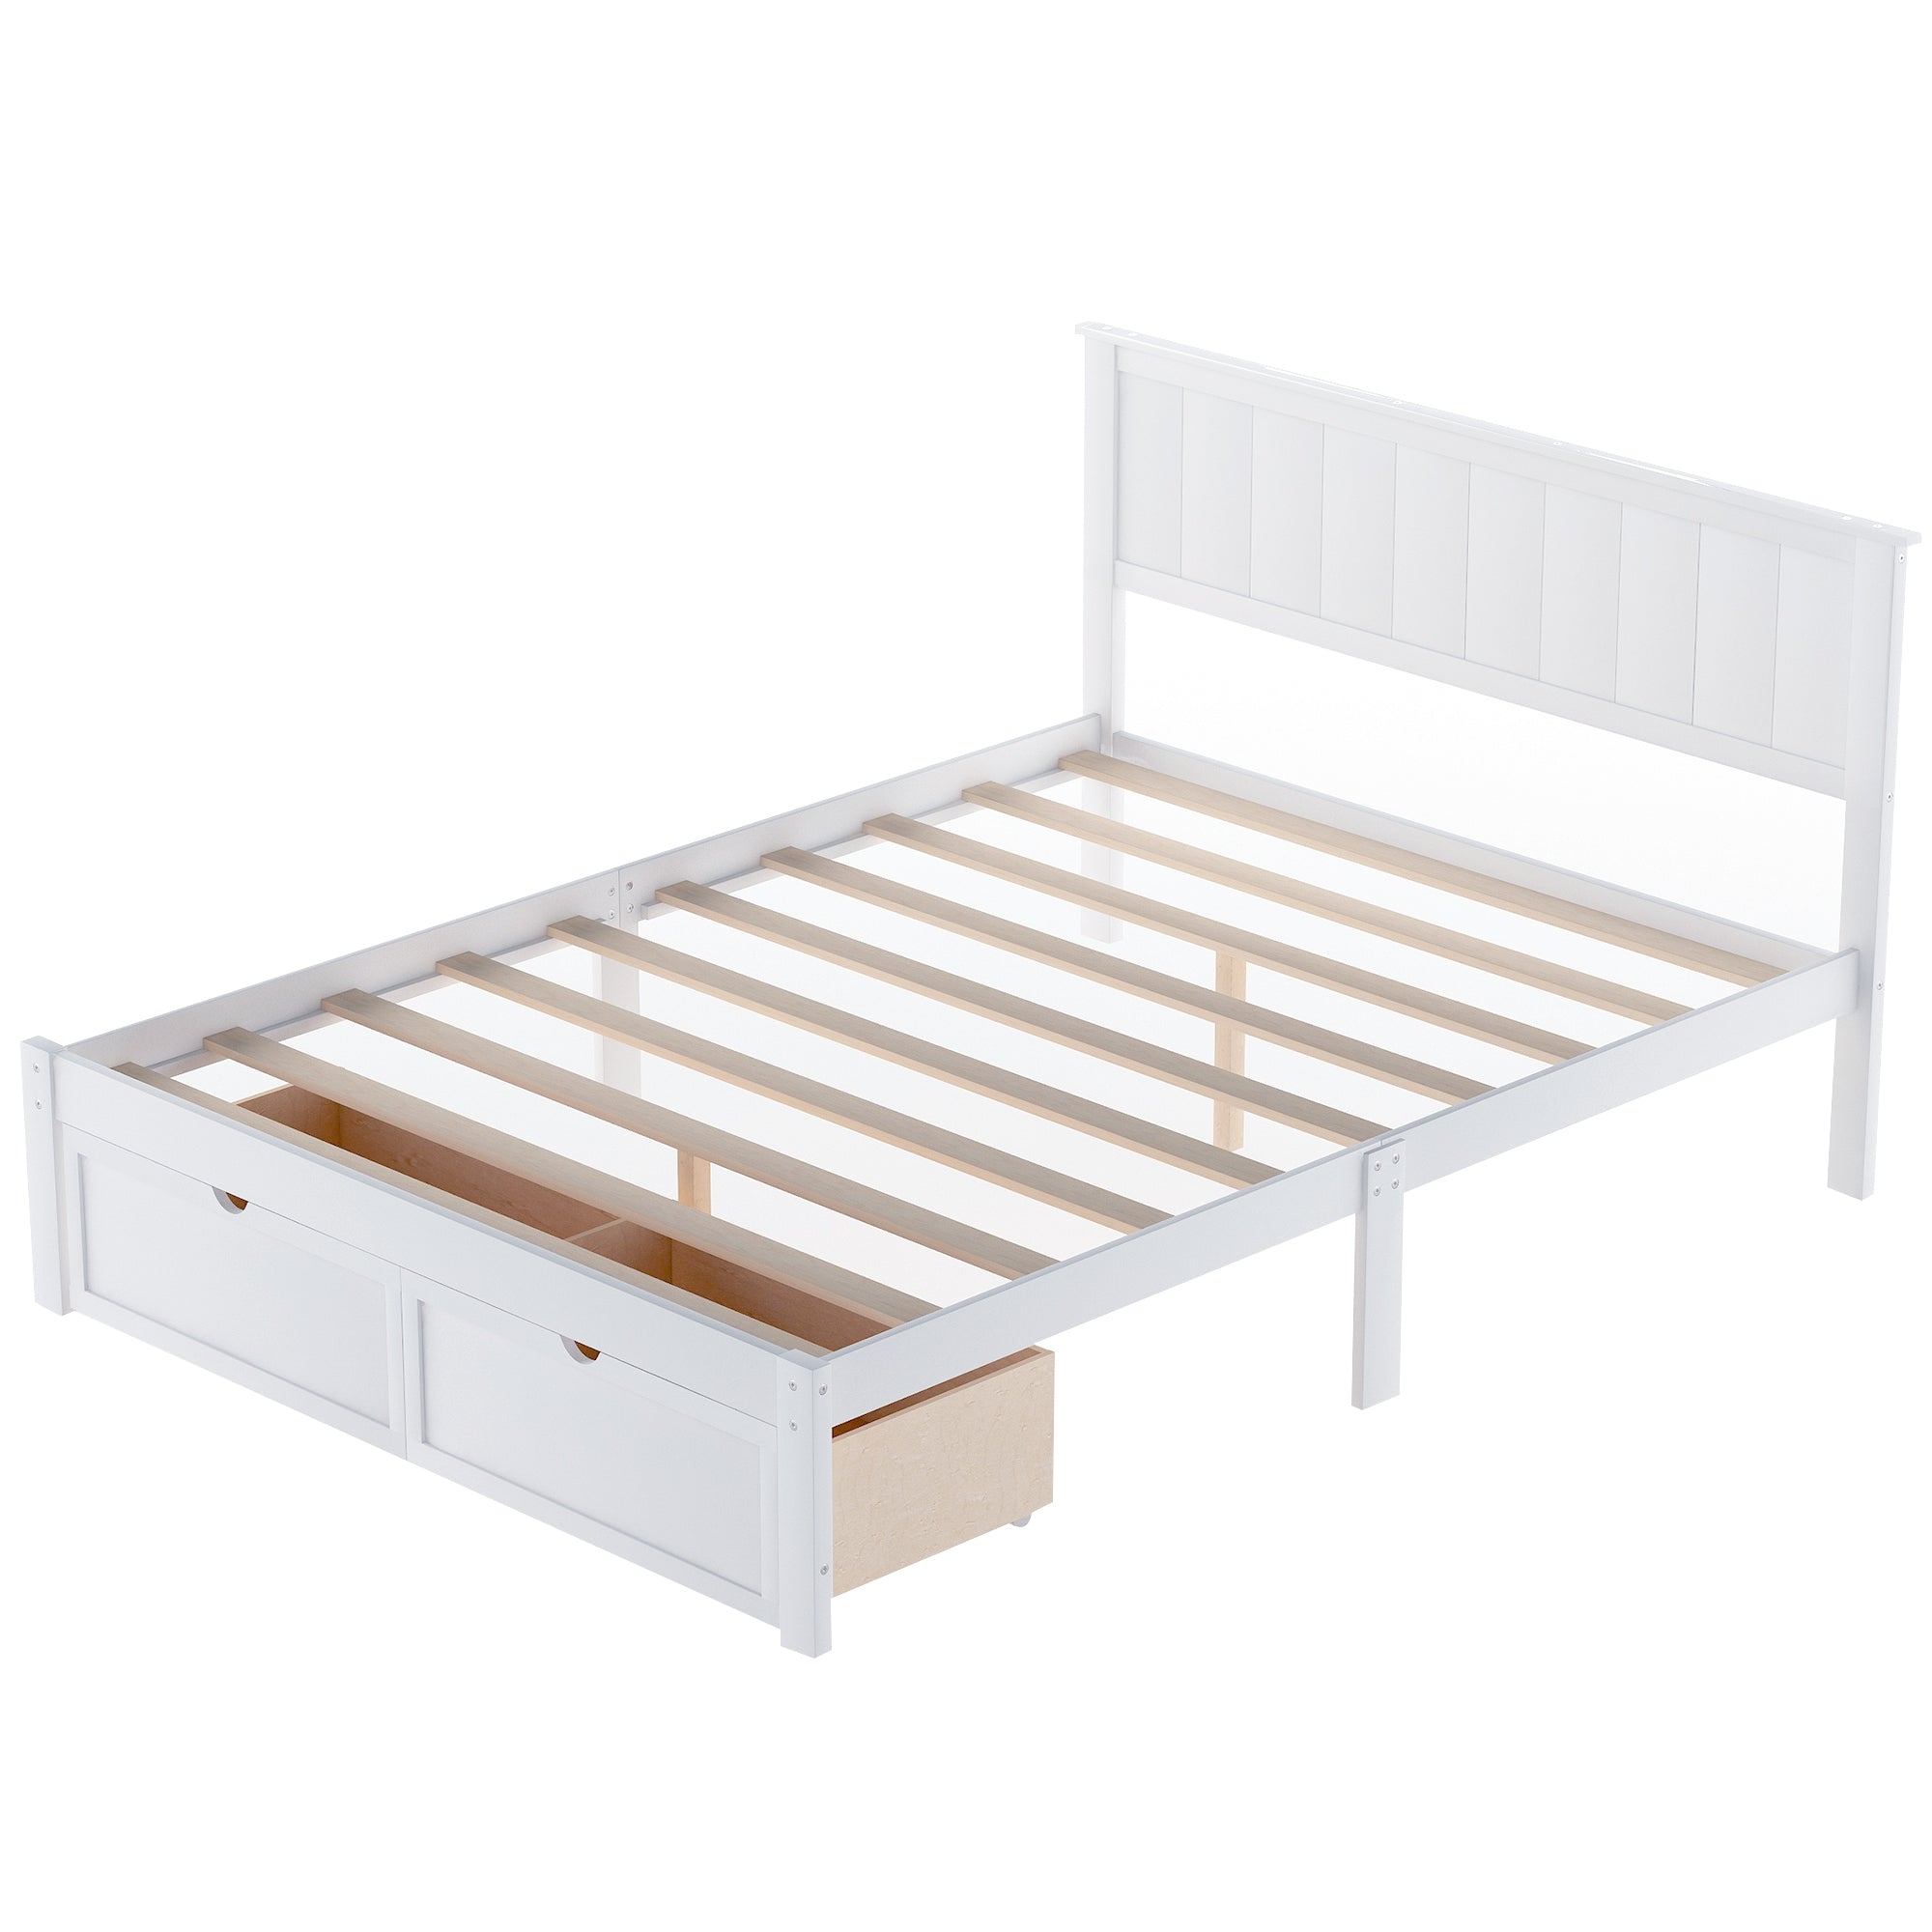 Full Size Wood Platform Bed Frame with Underbed Storage Drawers by: Alabama Beds